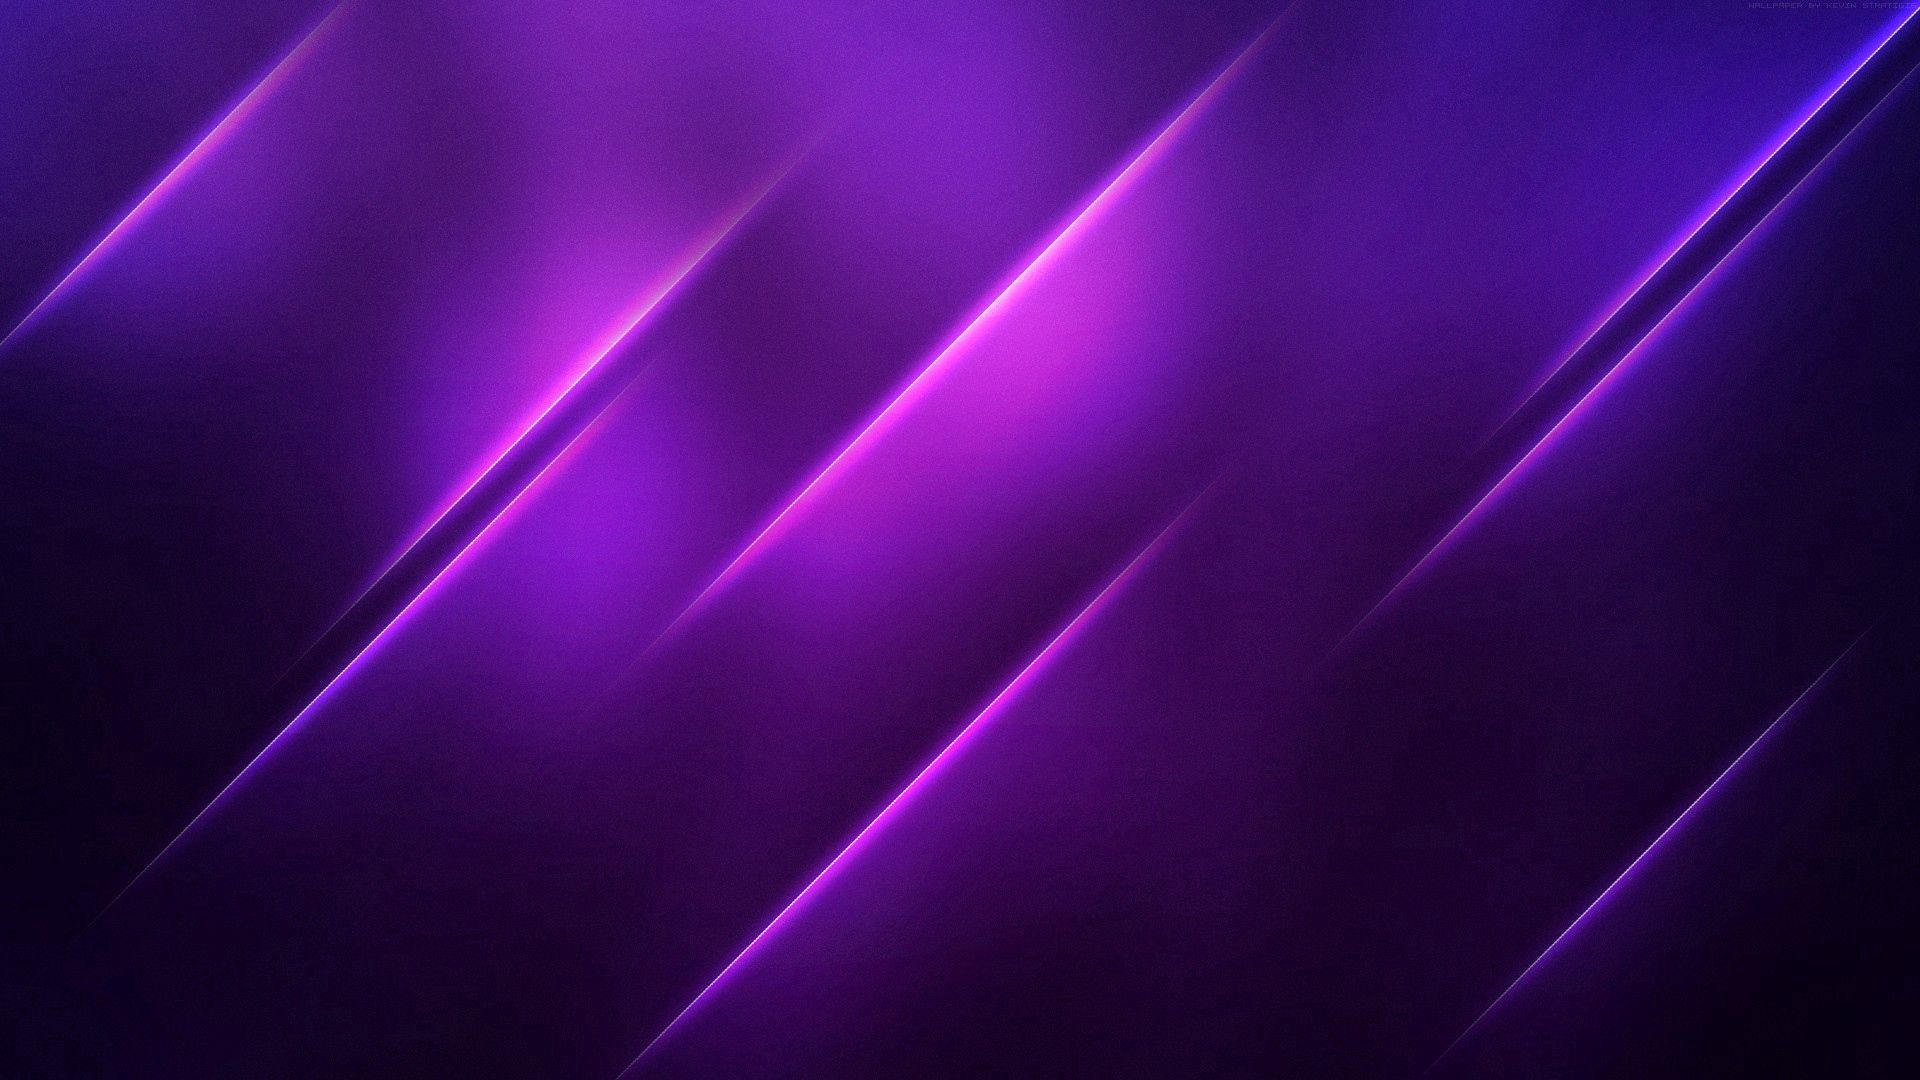 purple, violet, obliquely, abstract, bright, lines UHD